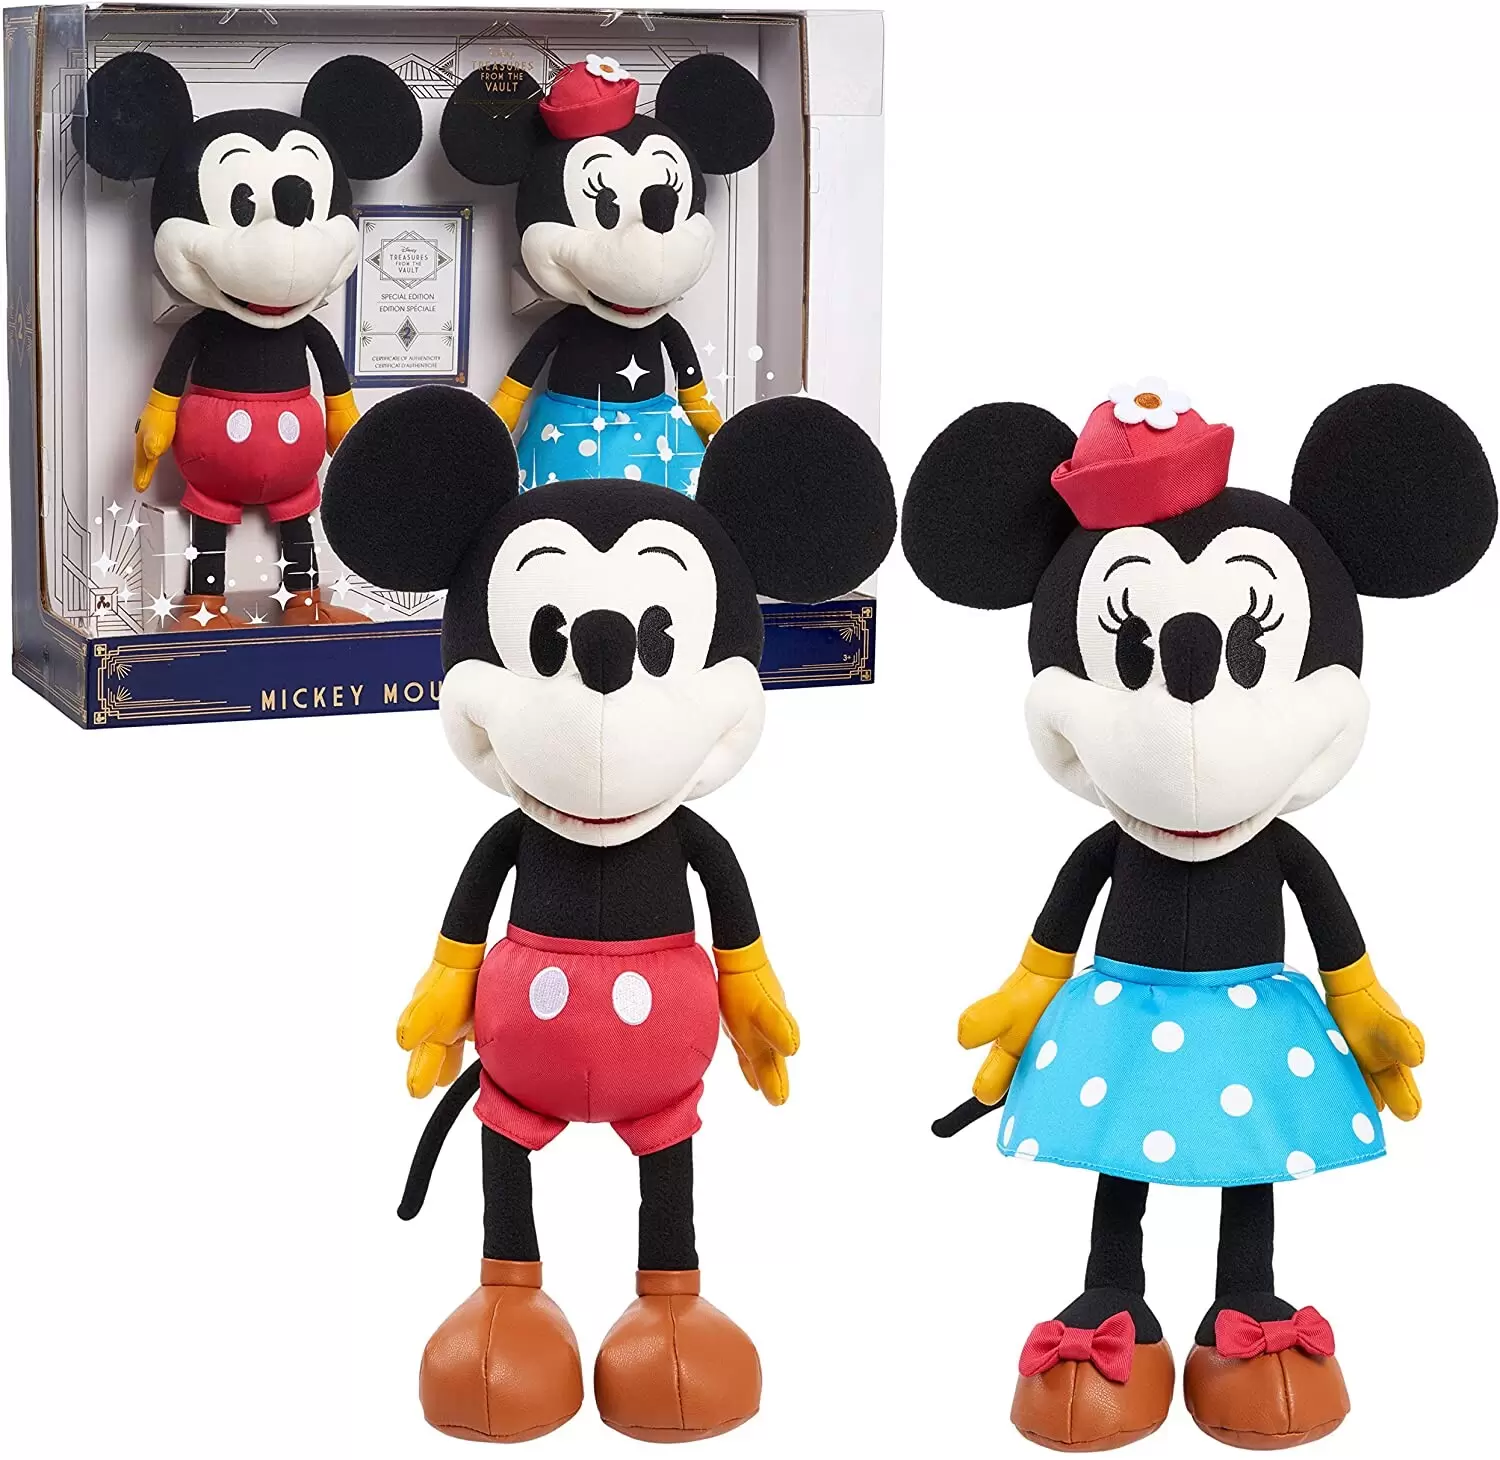 Peluches Disney Store - Disney Treasures from The Vault, Limited Edition Mickey Mouse and Minnie Mouse